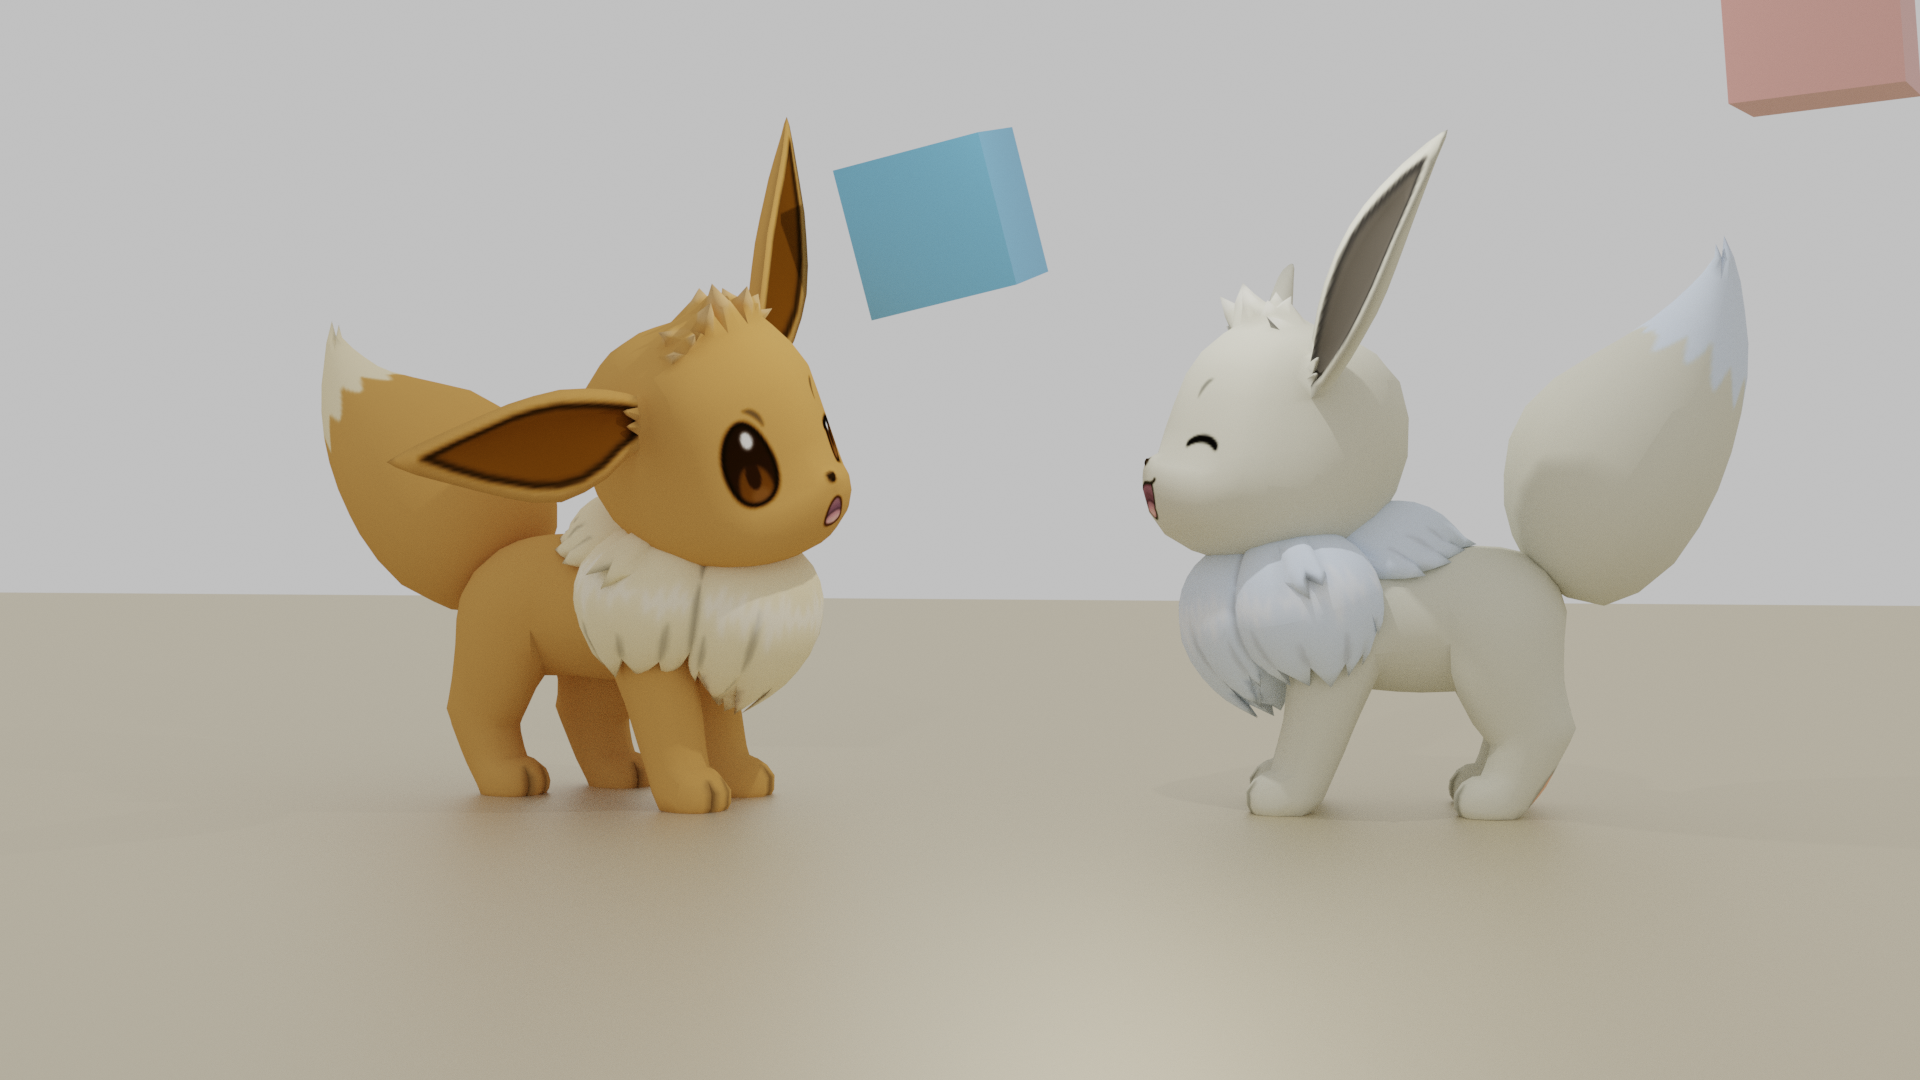 eevee all shiny 4 by Narutto67 on DeviantArt